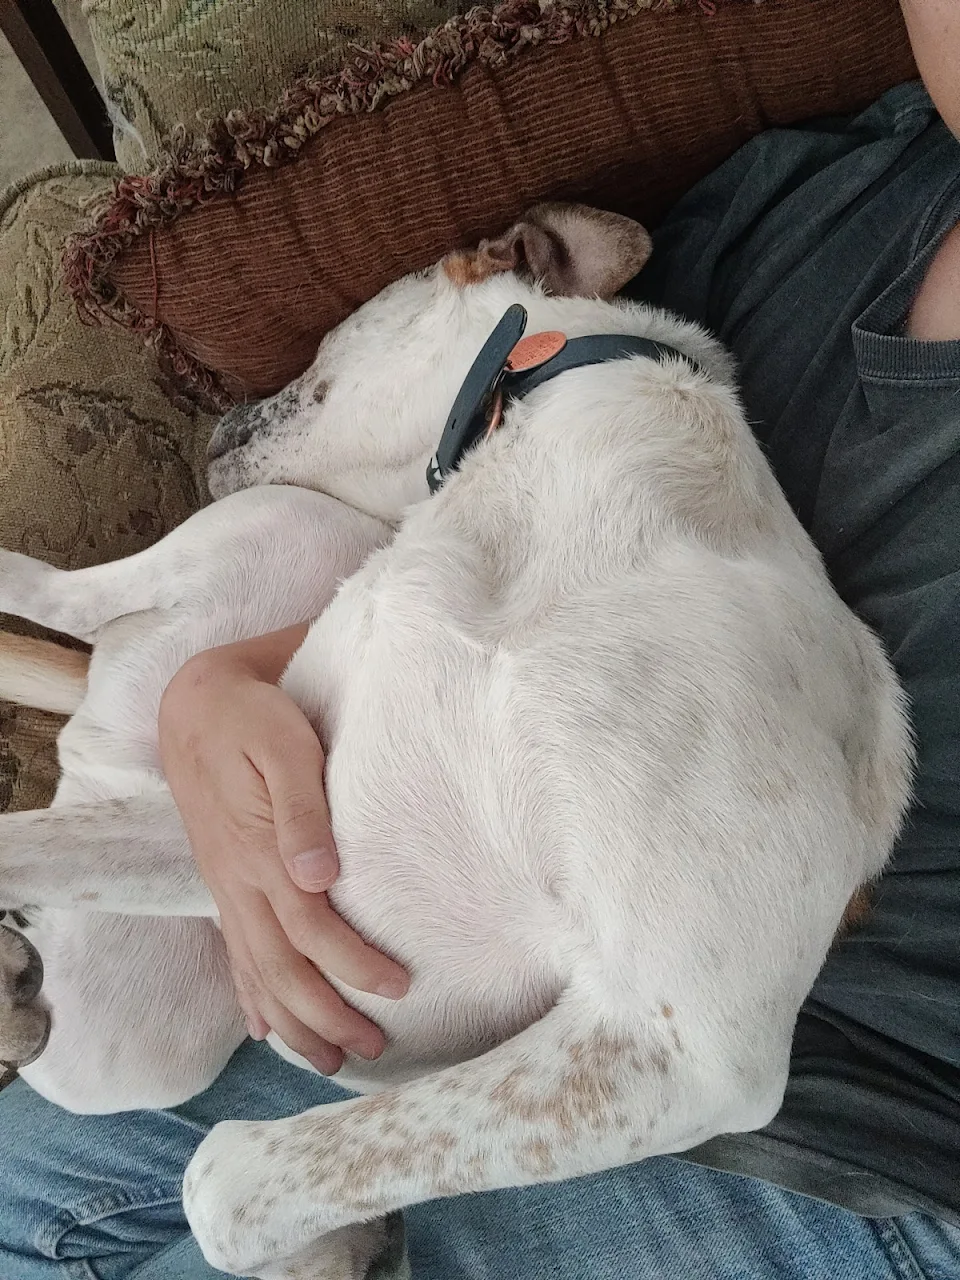 My friend's dog likes to cuddle like this